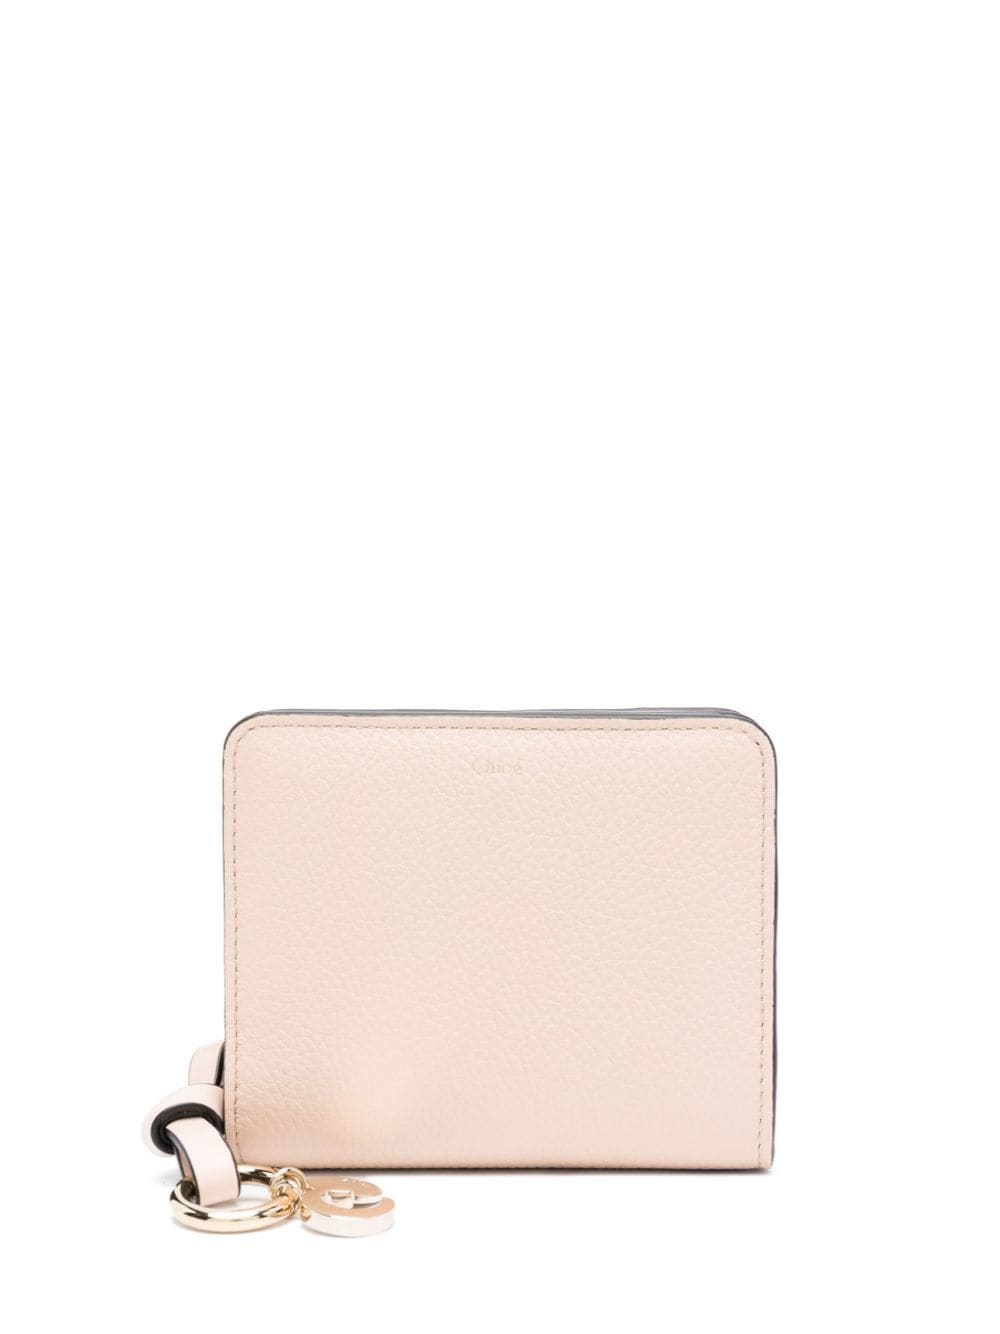 Chloé Alphabet Leather Compact Wallet In Neutral